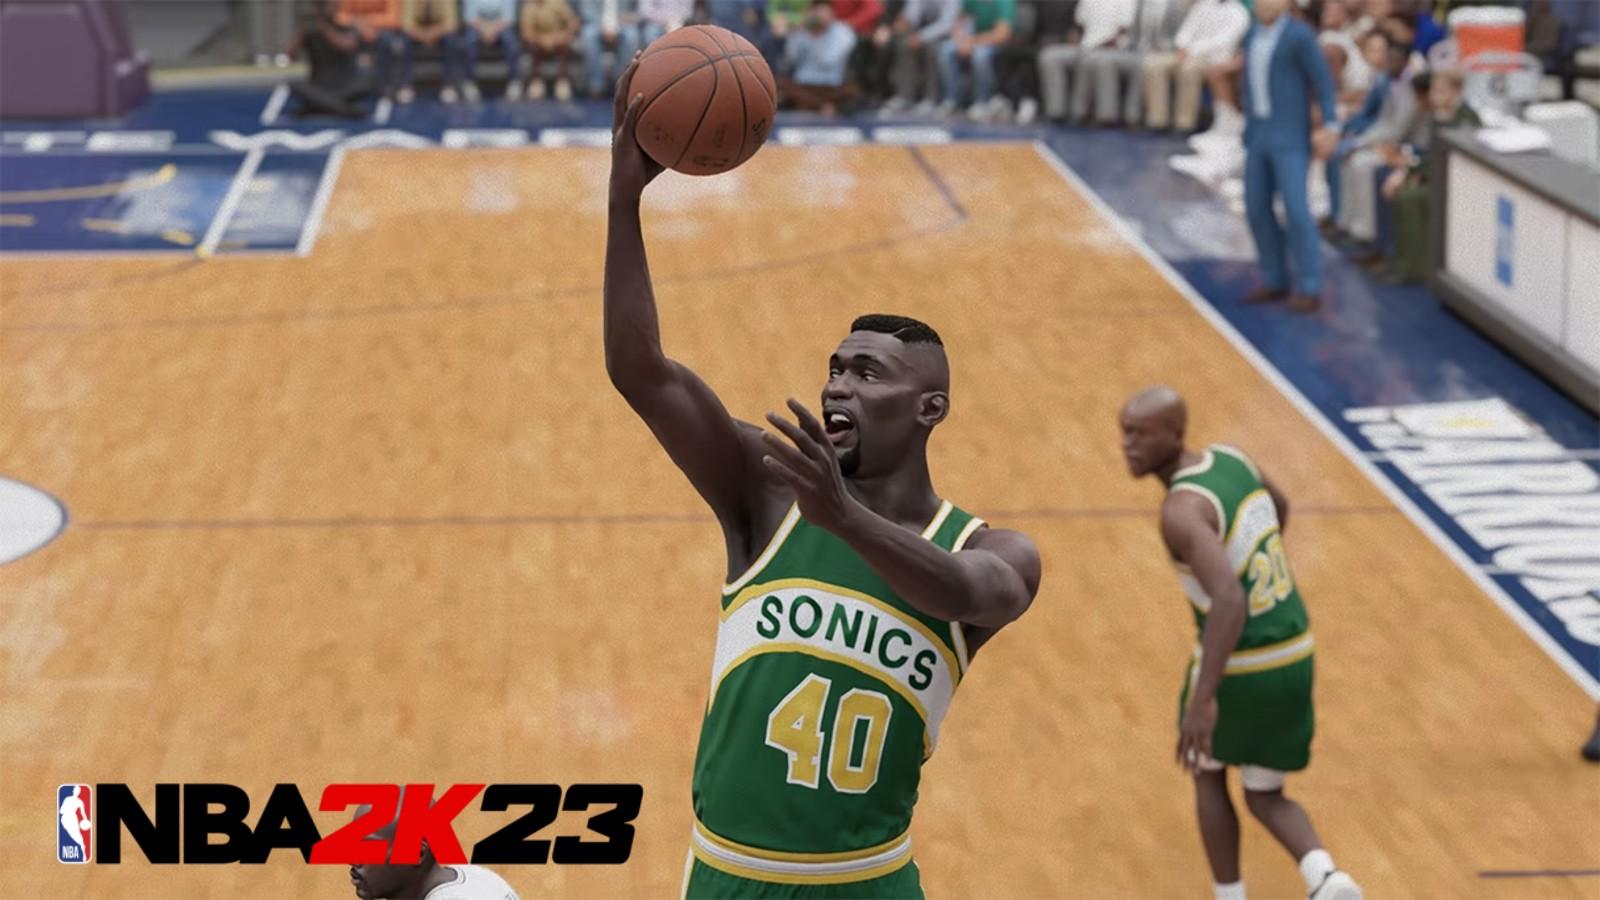 NBA 2K23 Patch Update 3.0 Face Scans & Dynamic Hair Updates